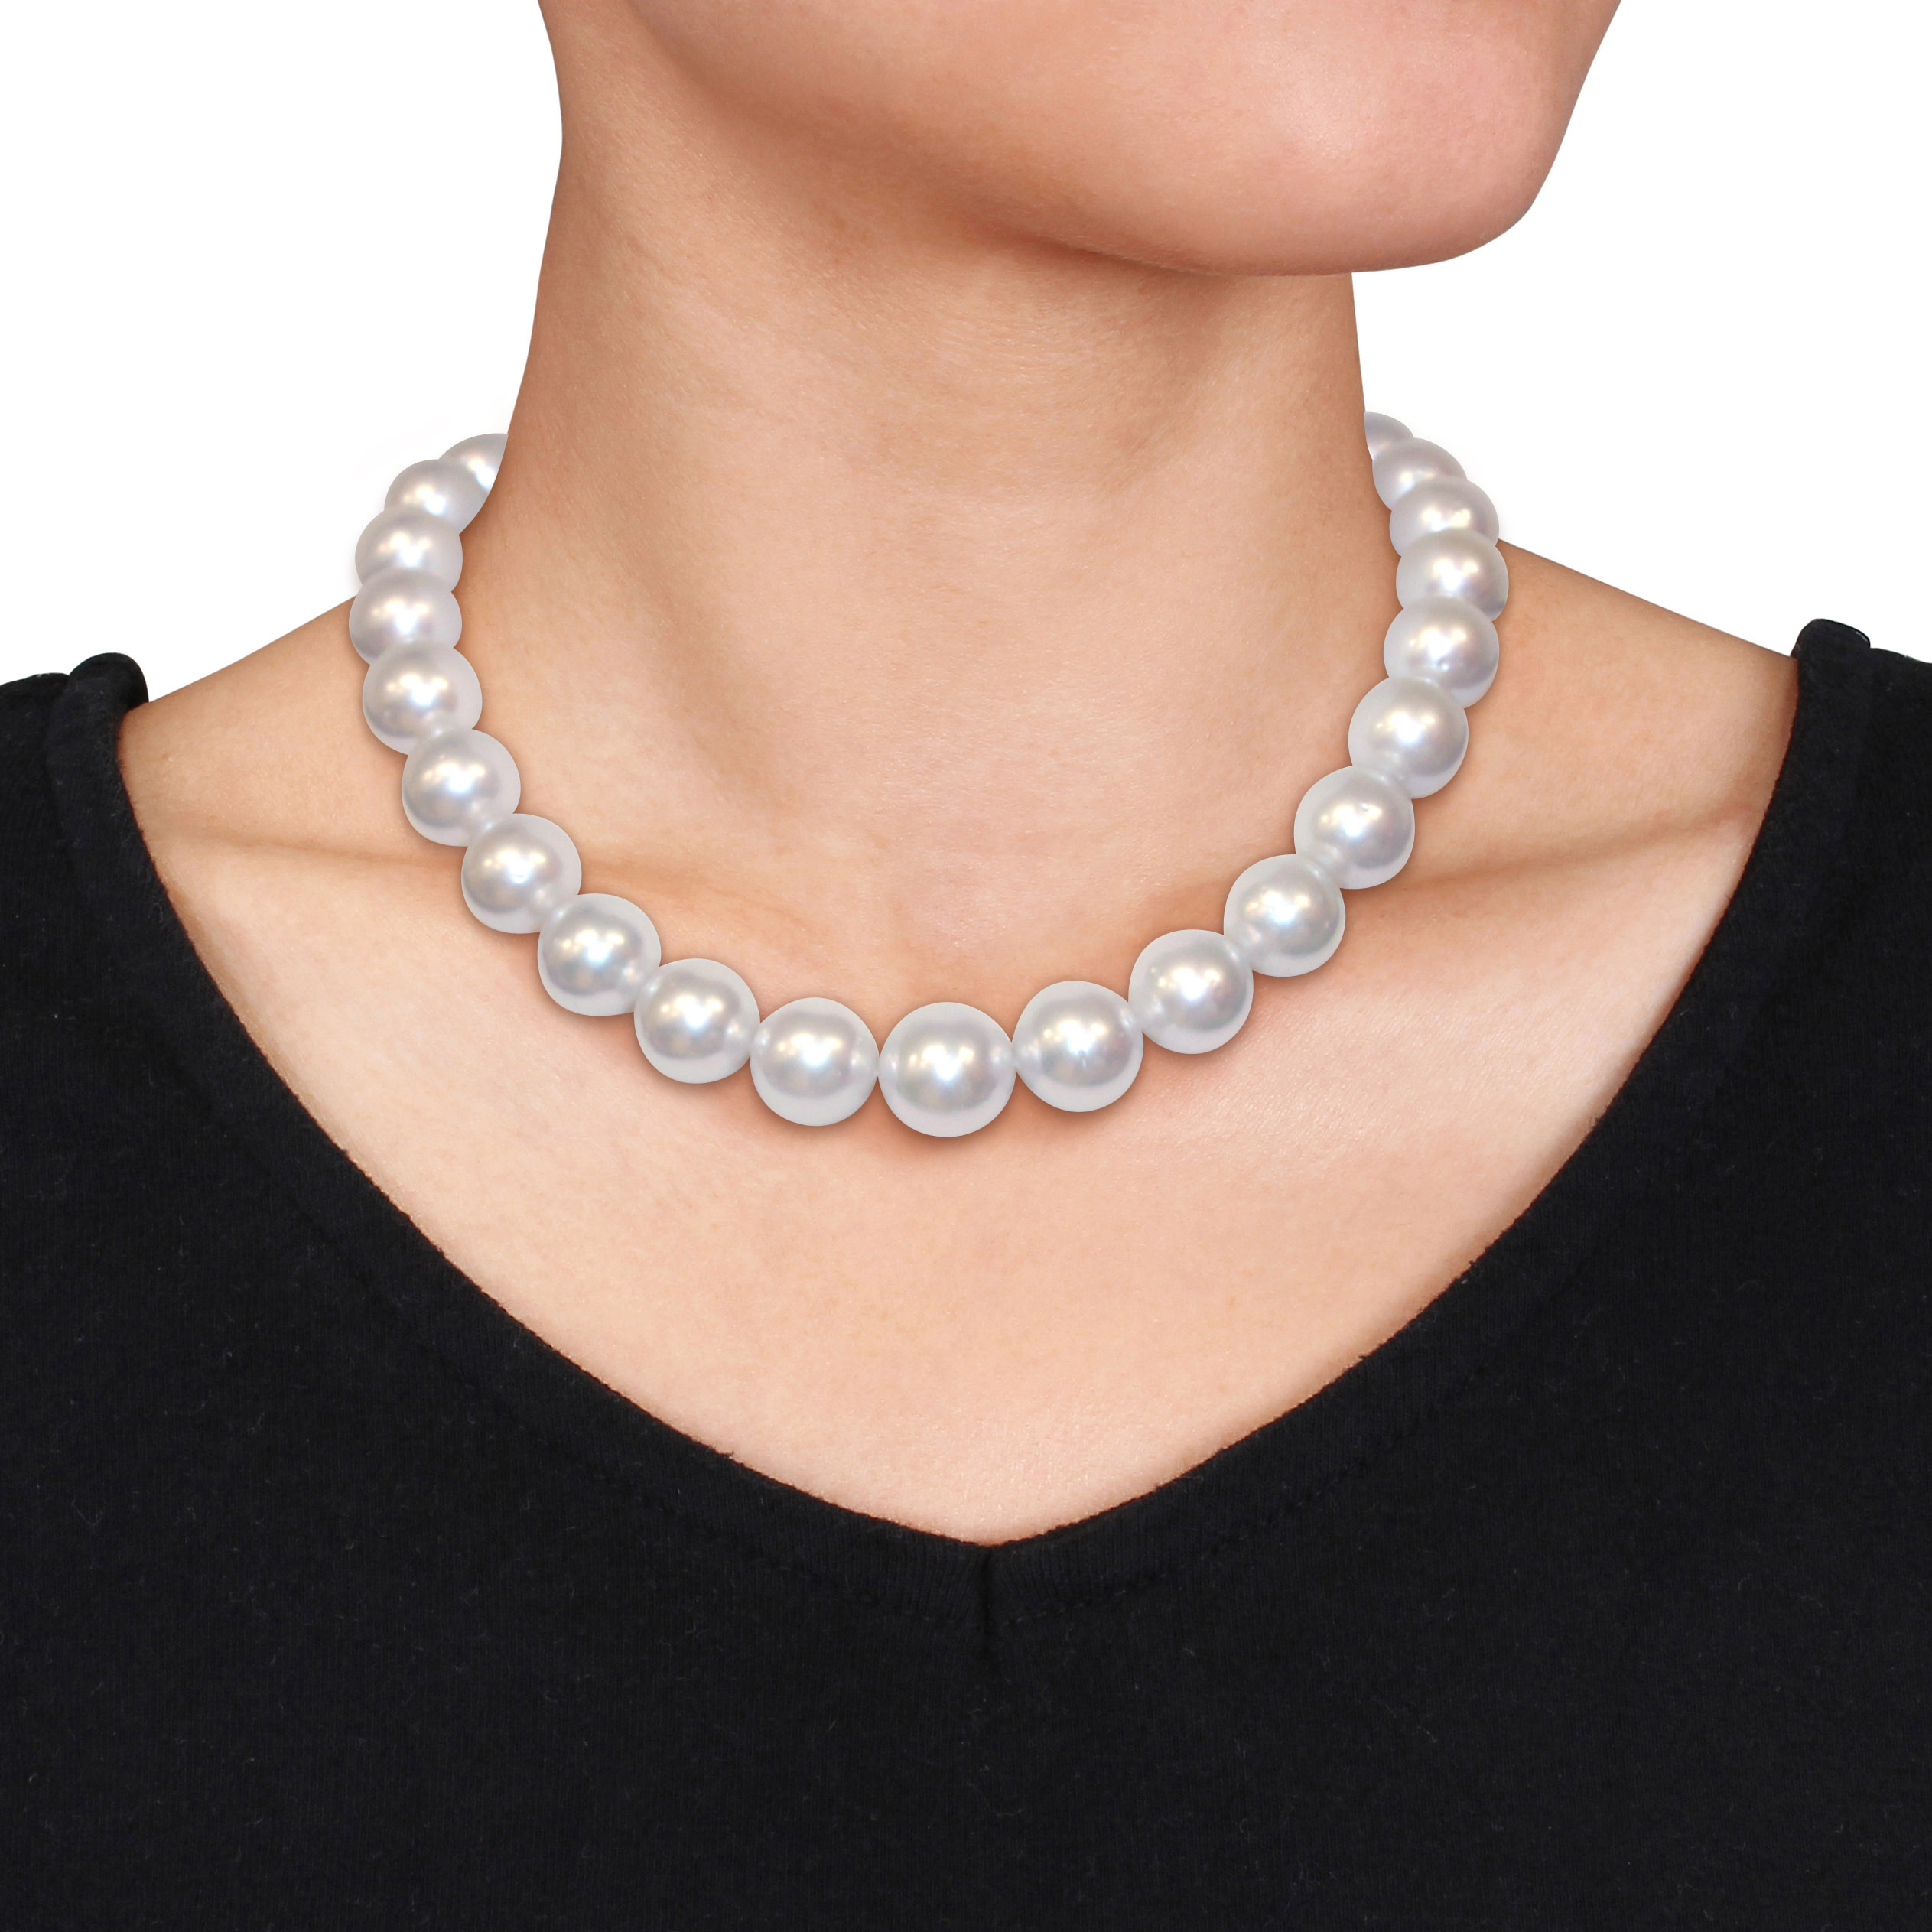 14-17 MM South Sea Graduated Pearl Necklace with 14k White Gold Diamond Accent Ball Clasp - 18 in